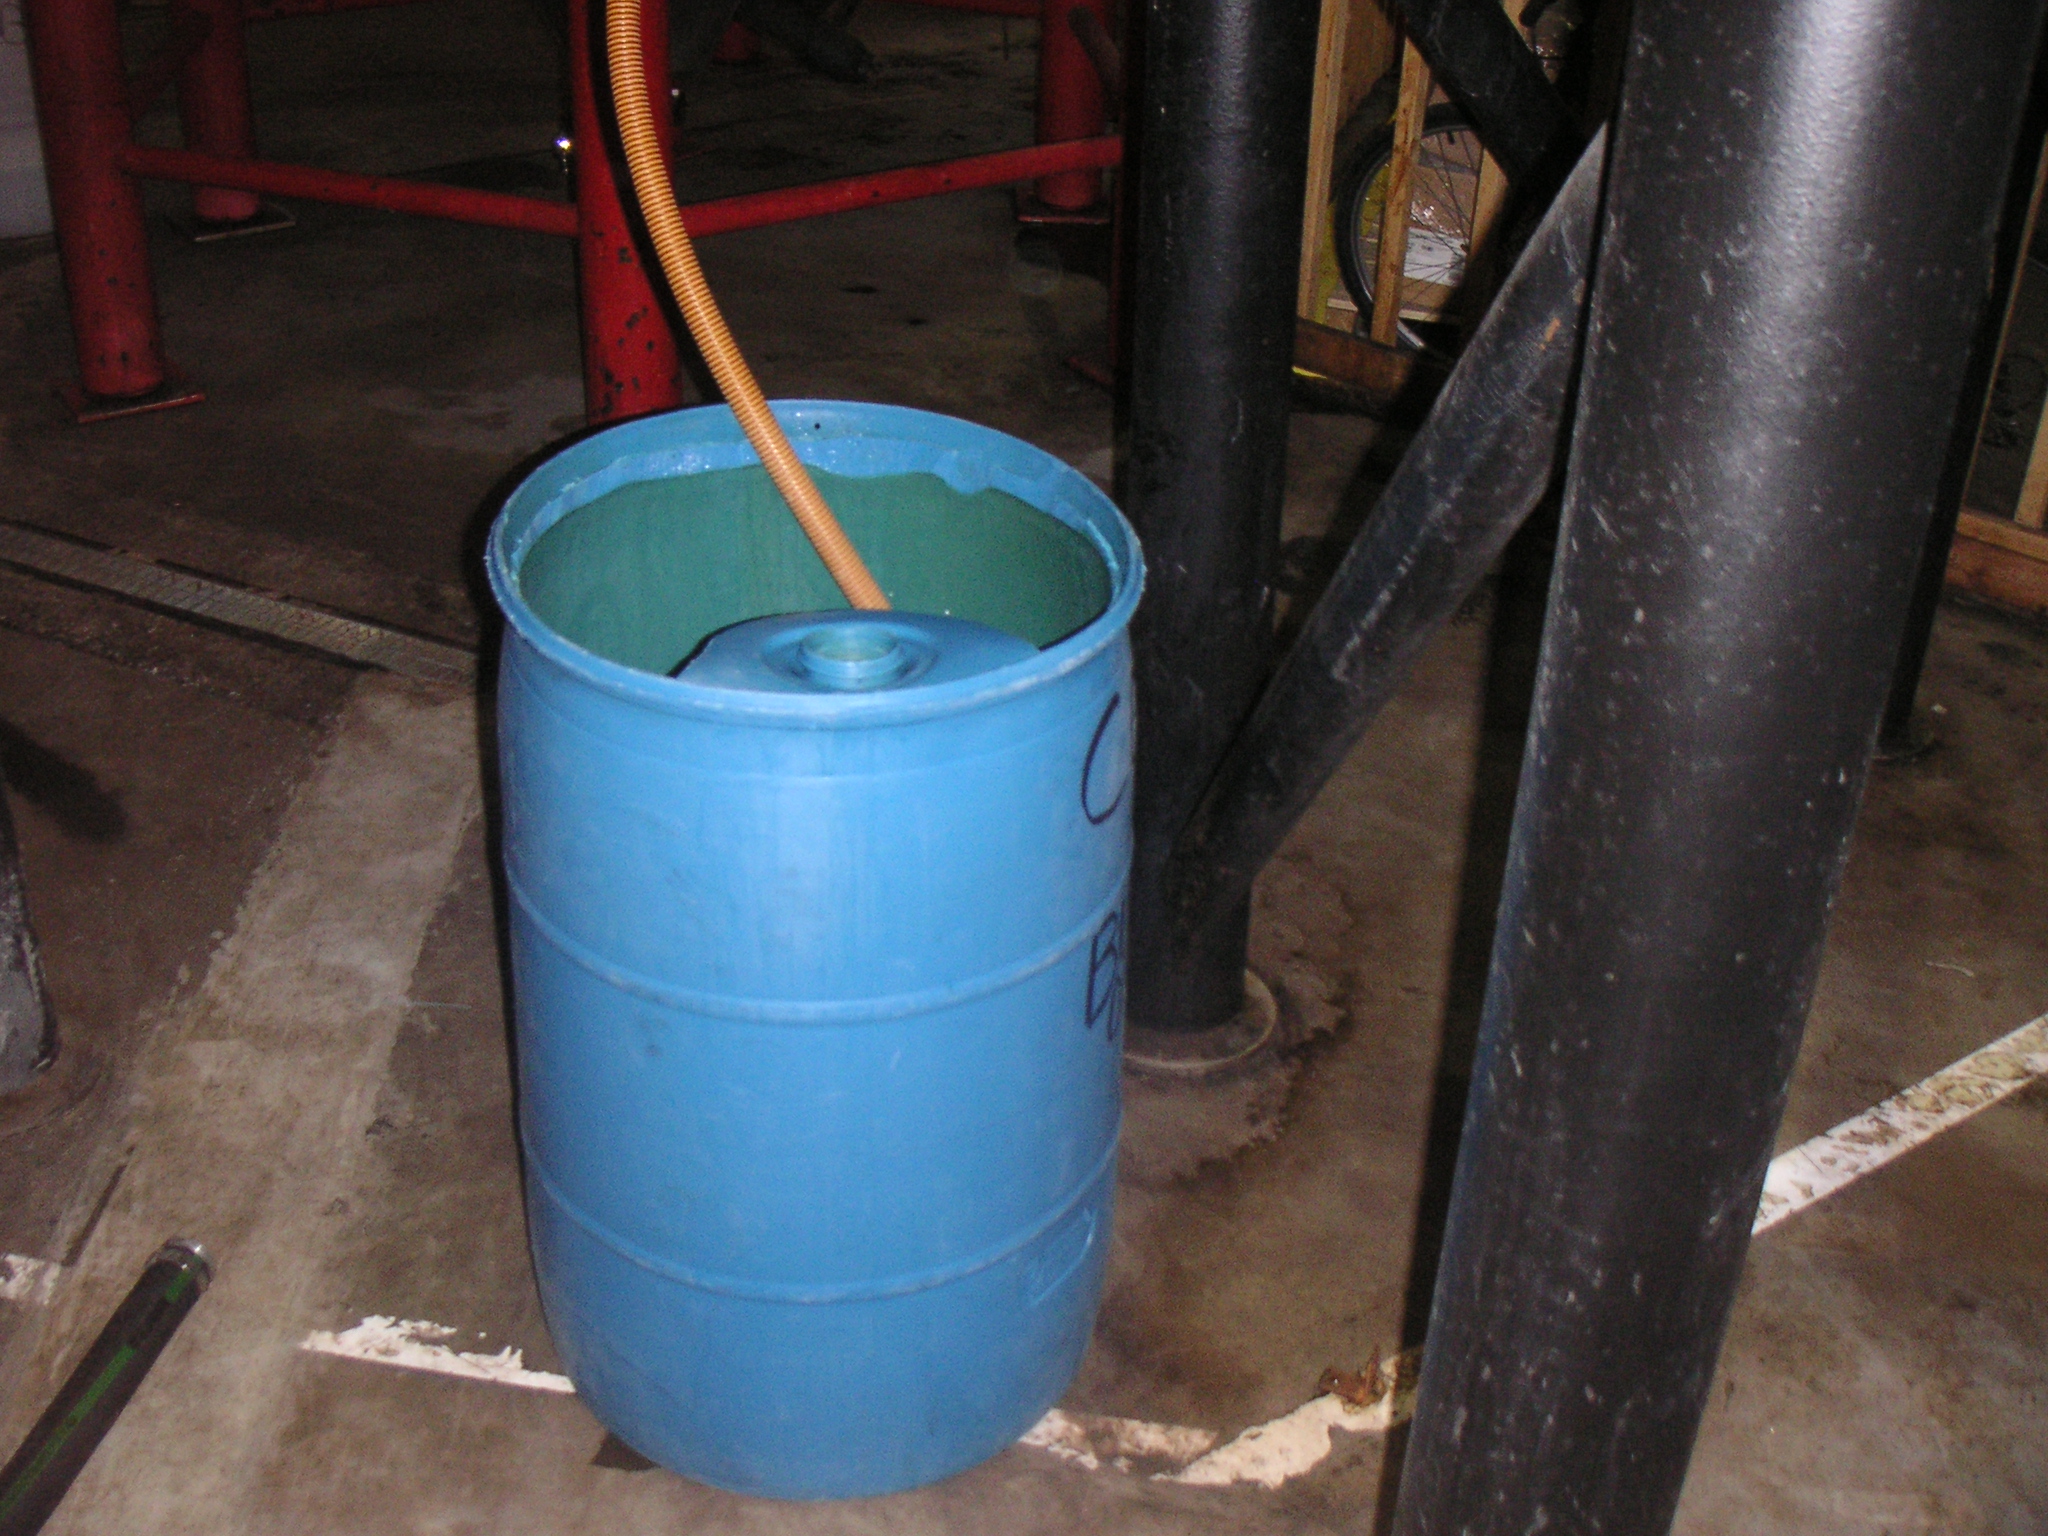 a bucket with some hose hanging from it